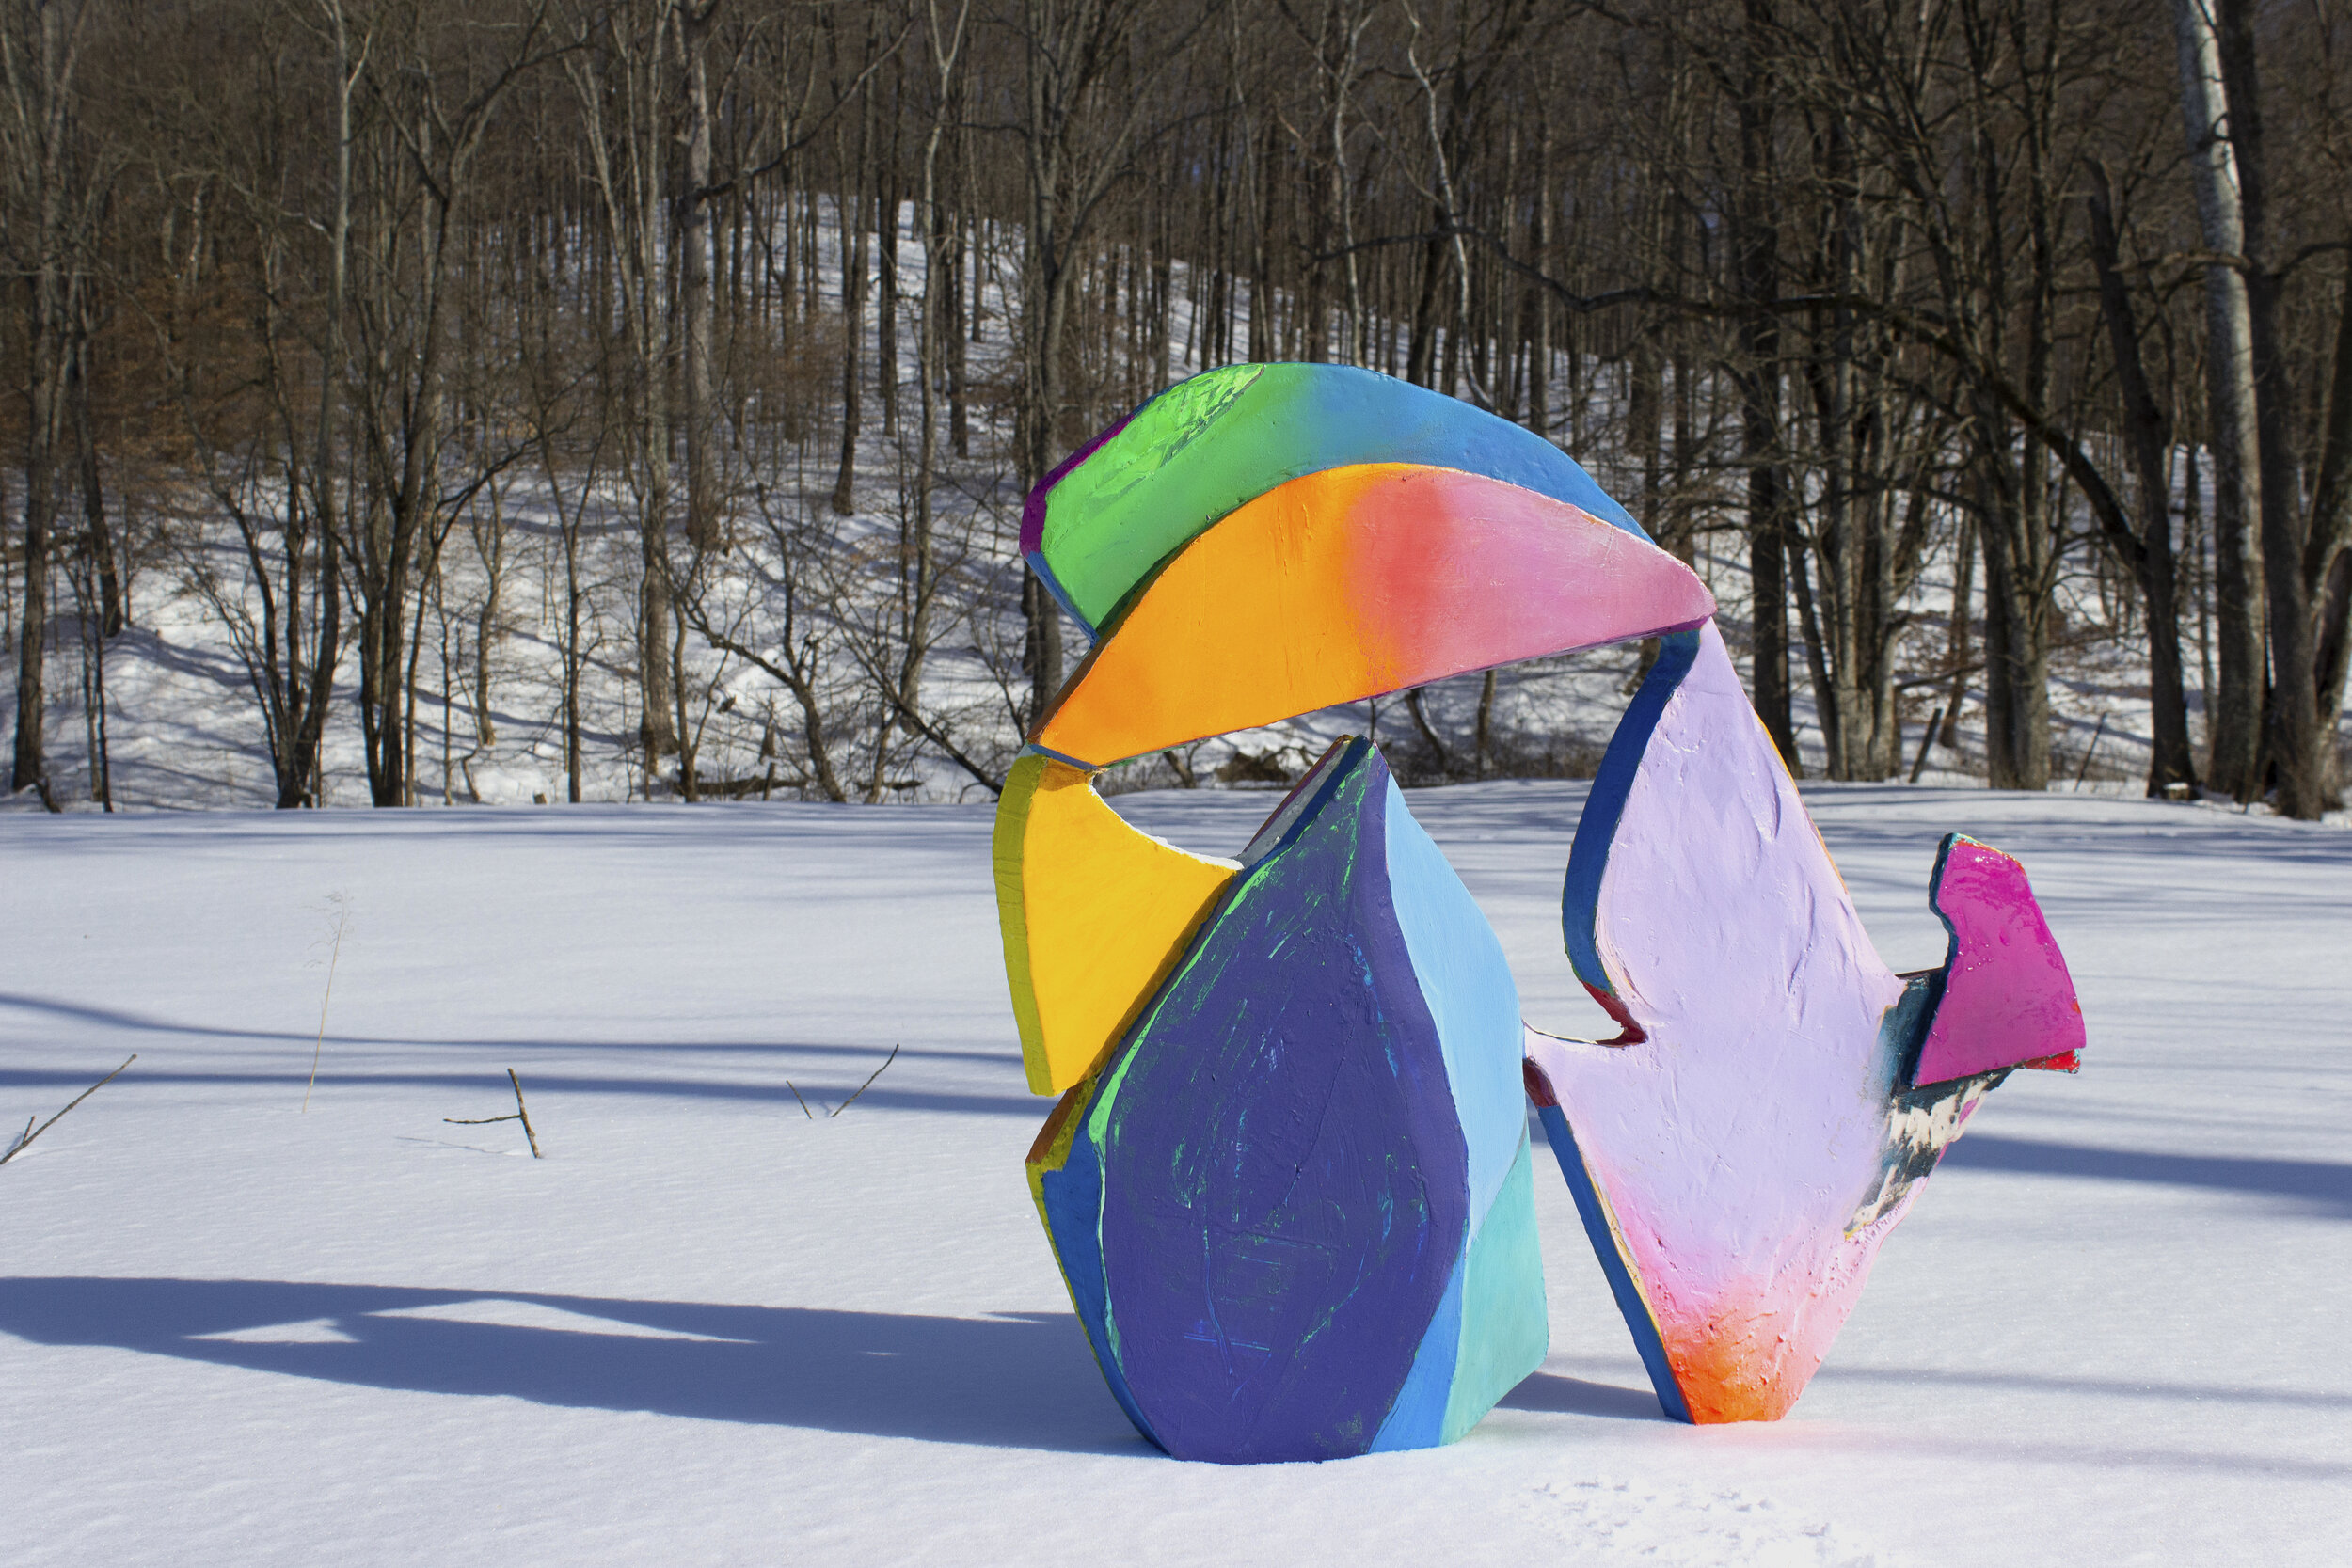  Zoom Land, 2020, Temporarily installed in Morgan-Monroe State Forest, Bloomington, IN 